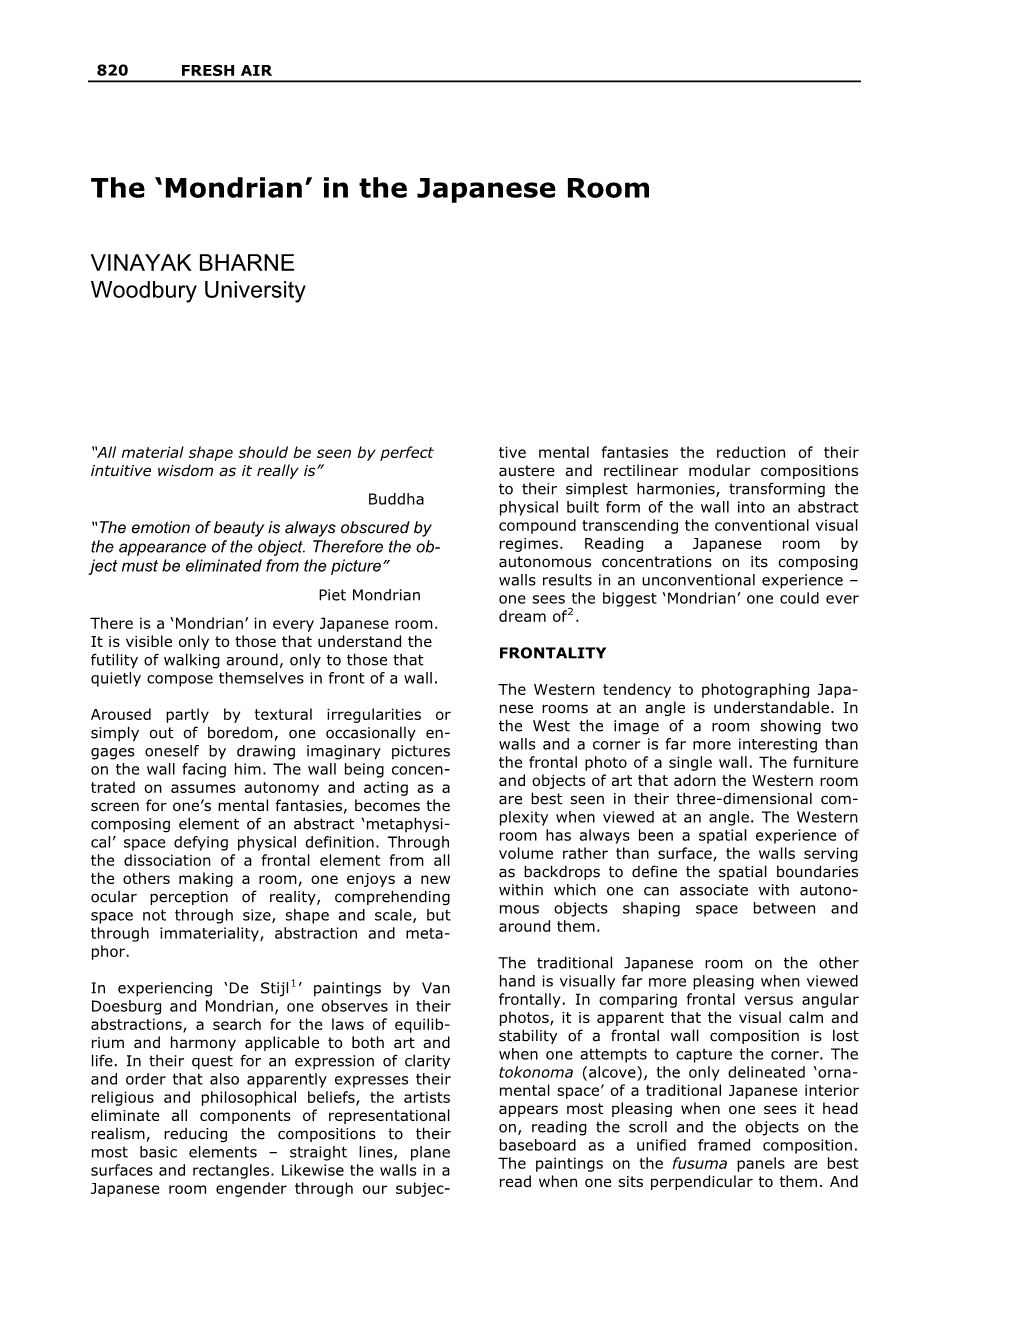 Mondrian’ in the Japanese Room